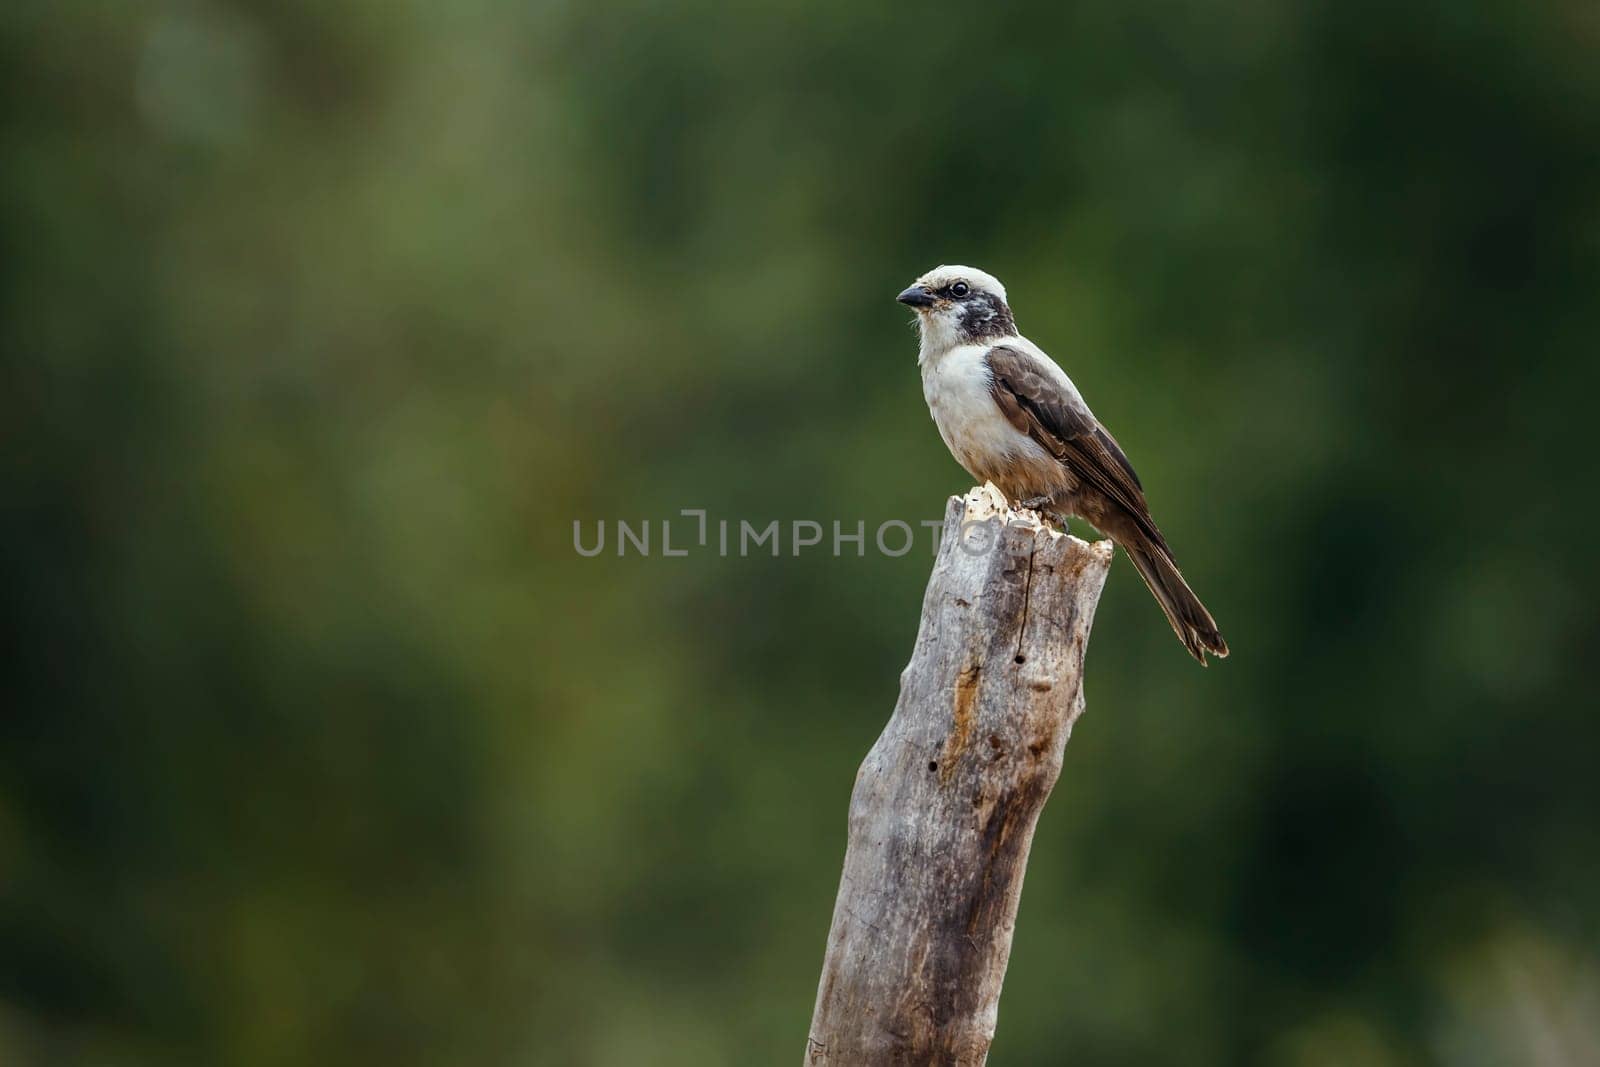 White crowned shrike in Kruger national park, South Africa by PACOCOMO